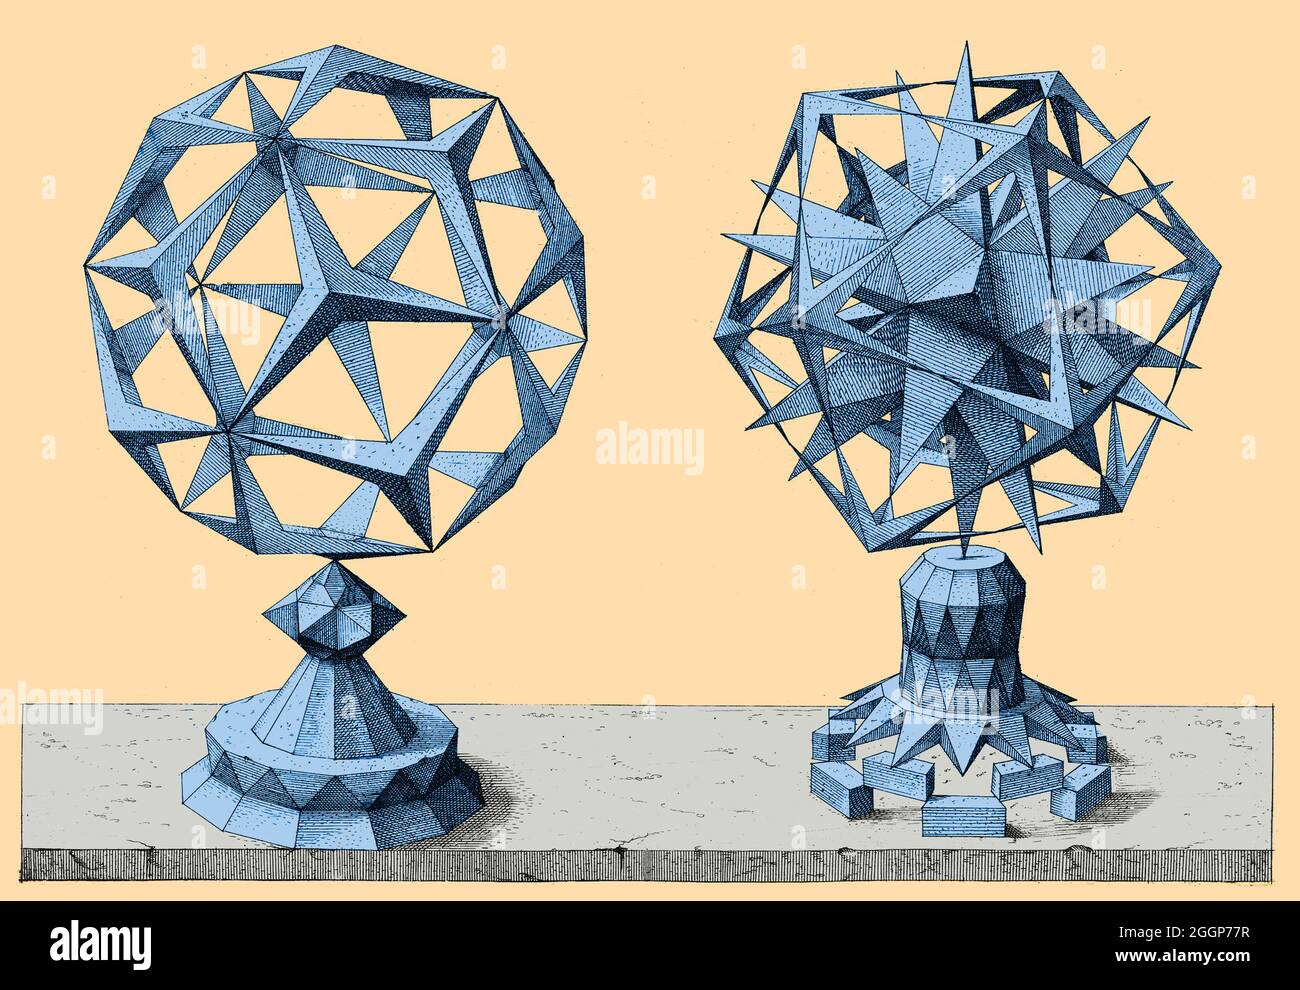 Polyhedral variations based on the five Platonic solids, or 'regular bodies': the tetrahedron, cube, octahedron, dodecahedron, and icosahedron. From Perspectiva Corporum Regularium (Perspective of the Regular Bodies), a compendium of perspectival geometry intended to show off the graphic skills of Wenzel Jamnitzer, a famous sixteenth-century German goldsmith. Engraved by Jost Amman (Swiss, 1539-1591) after Jamnitzer. Color enhanced. Stock Photo